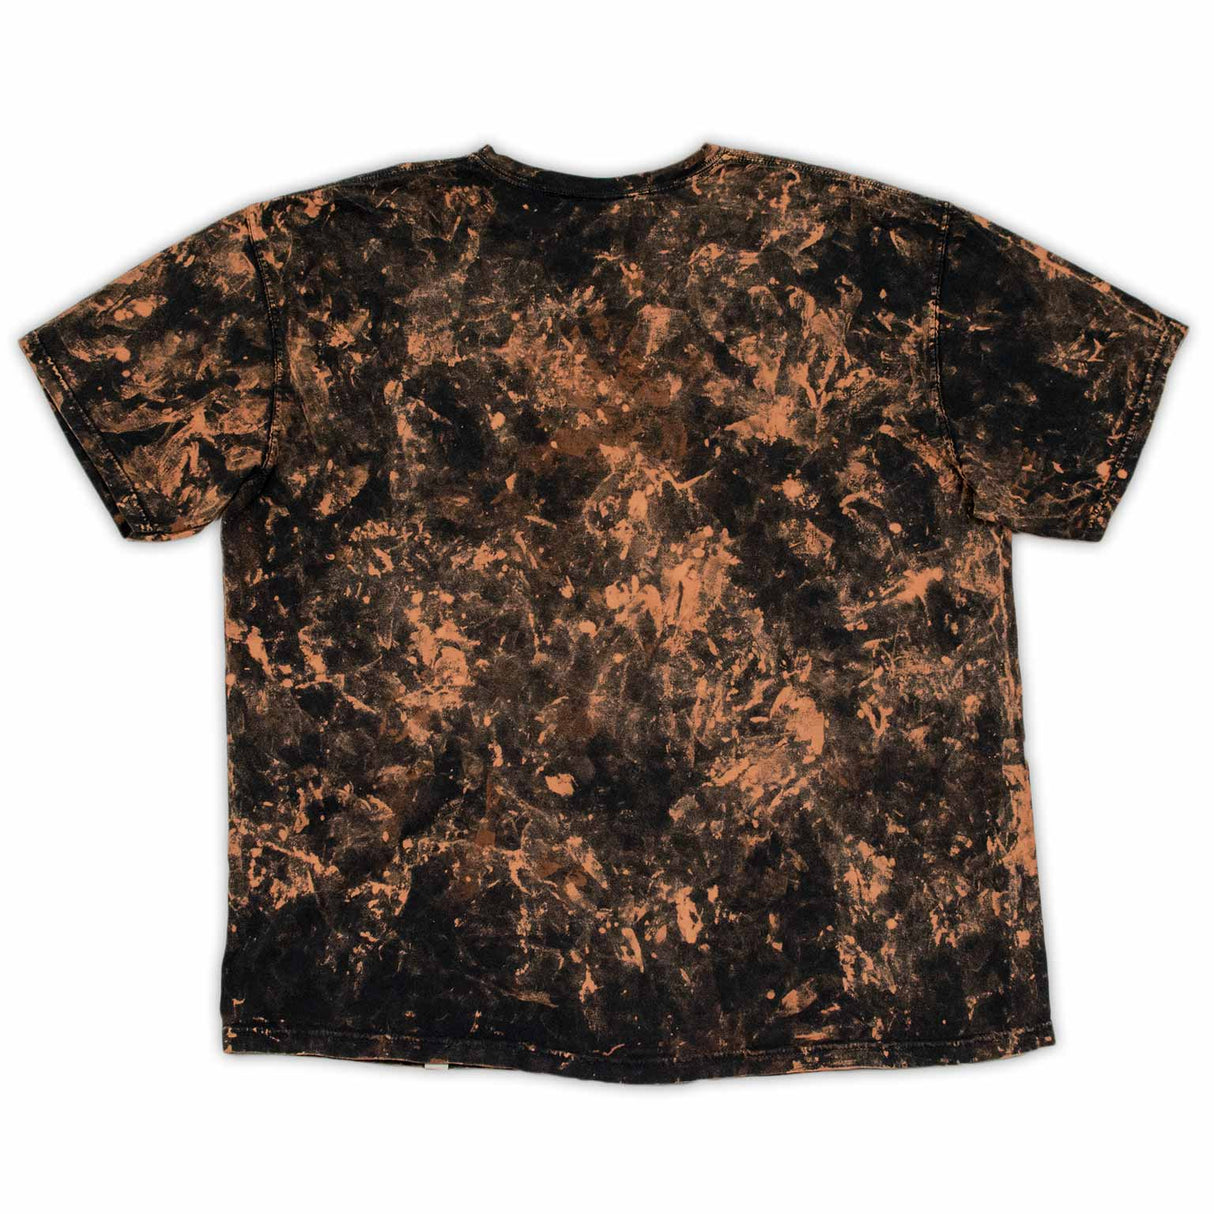 A stylish bleached t-shirt makes a statement with the 'Woof Dyes' logo, amidst a mottled backdrop of blacks and browns for a rugged look.